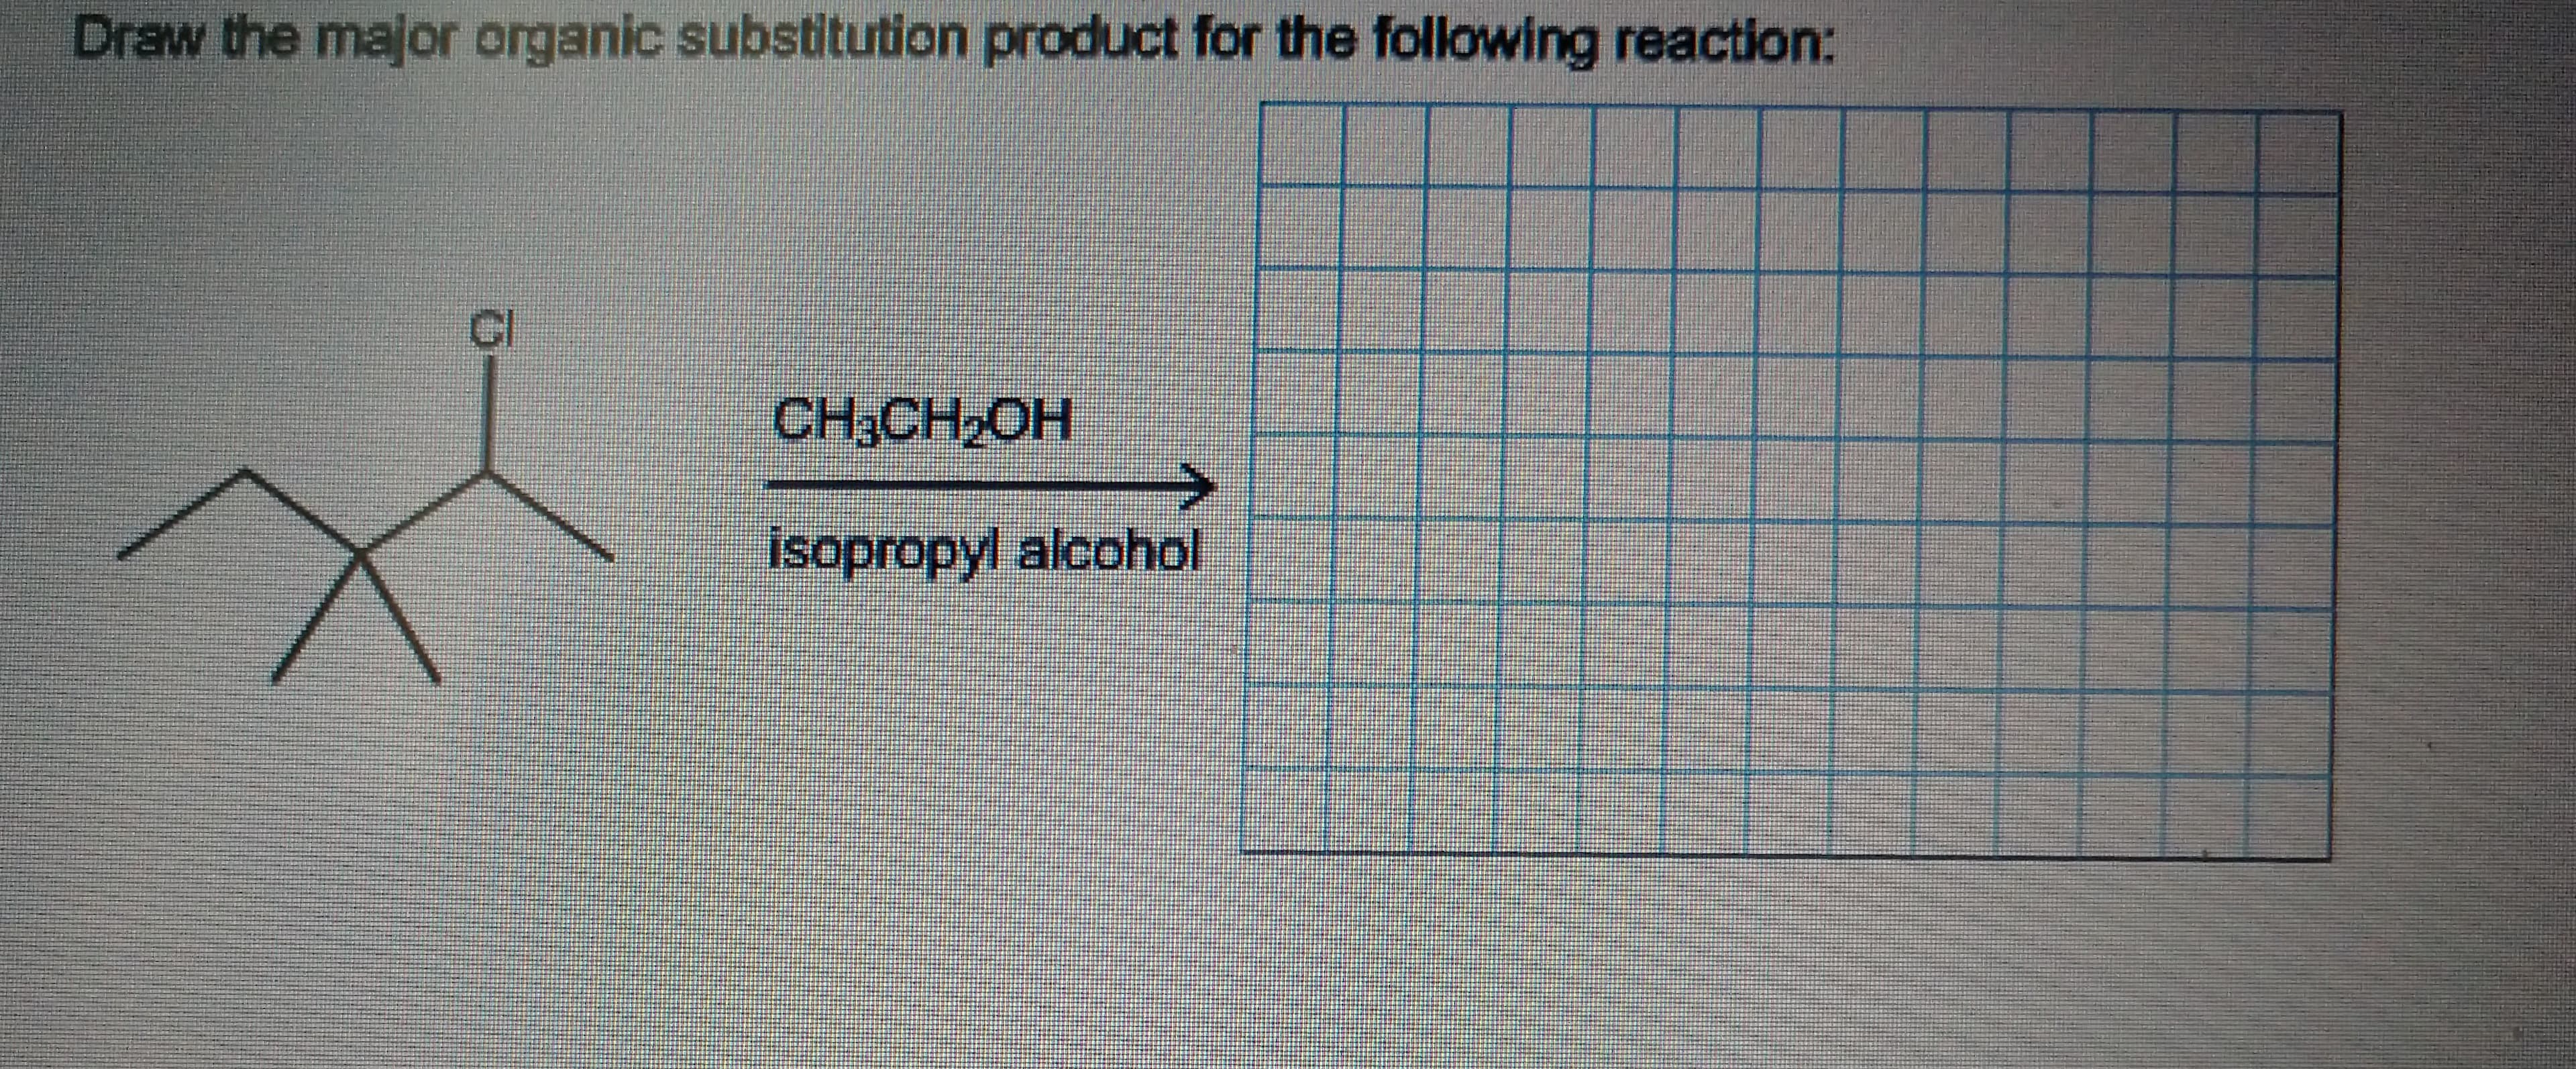 Draw the major organic substitution product for the following reaction:
GI
CH3CH2OH
isopropyl alcohol
